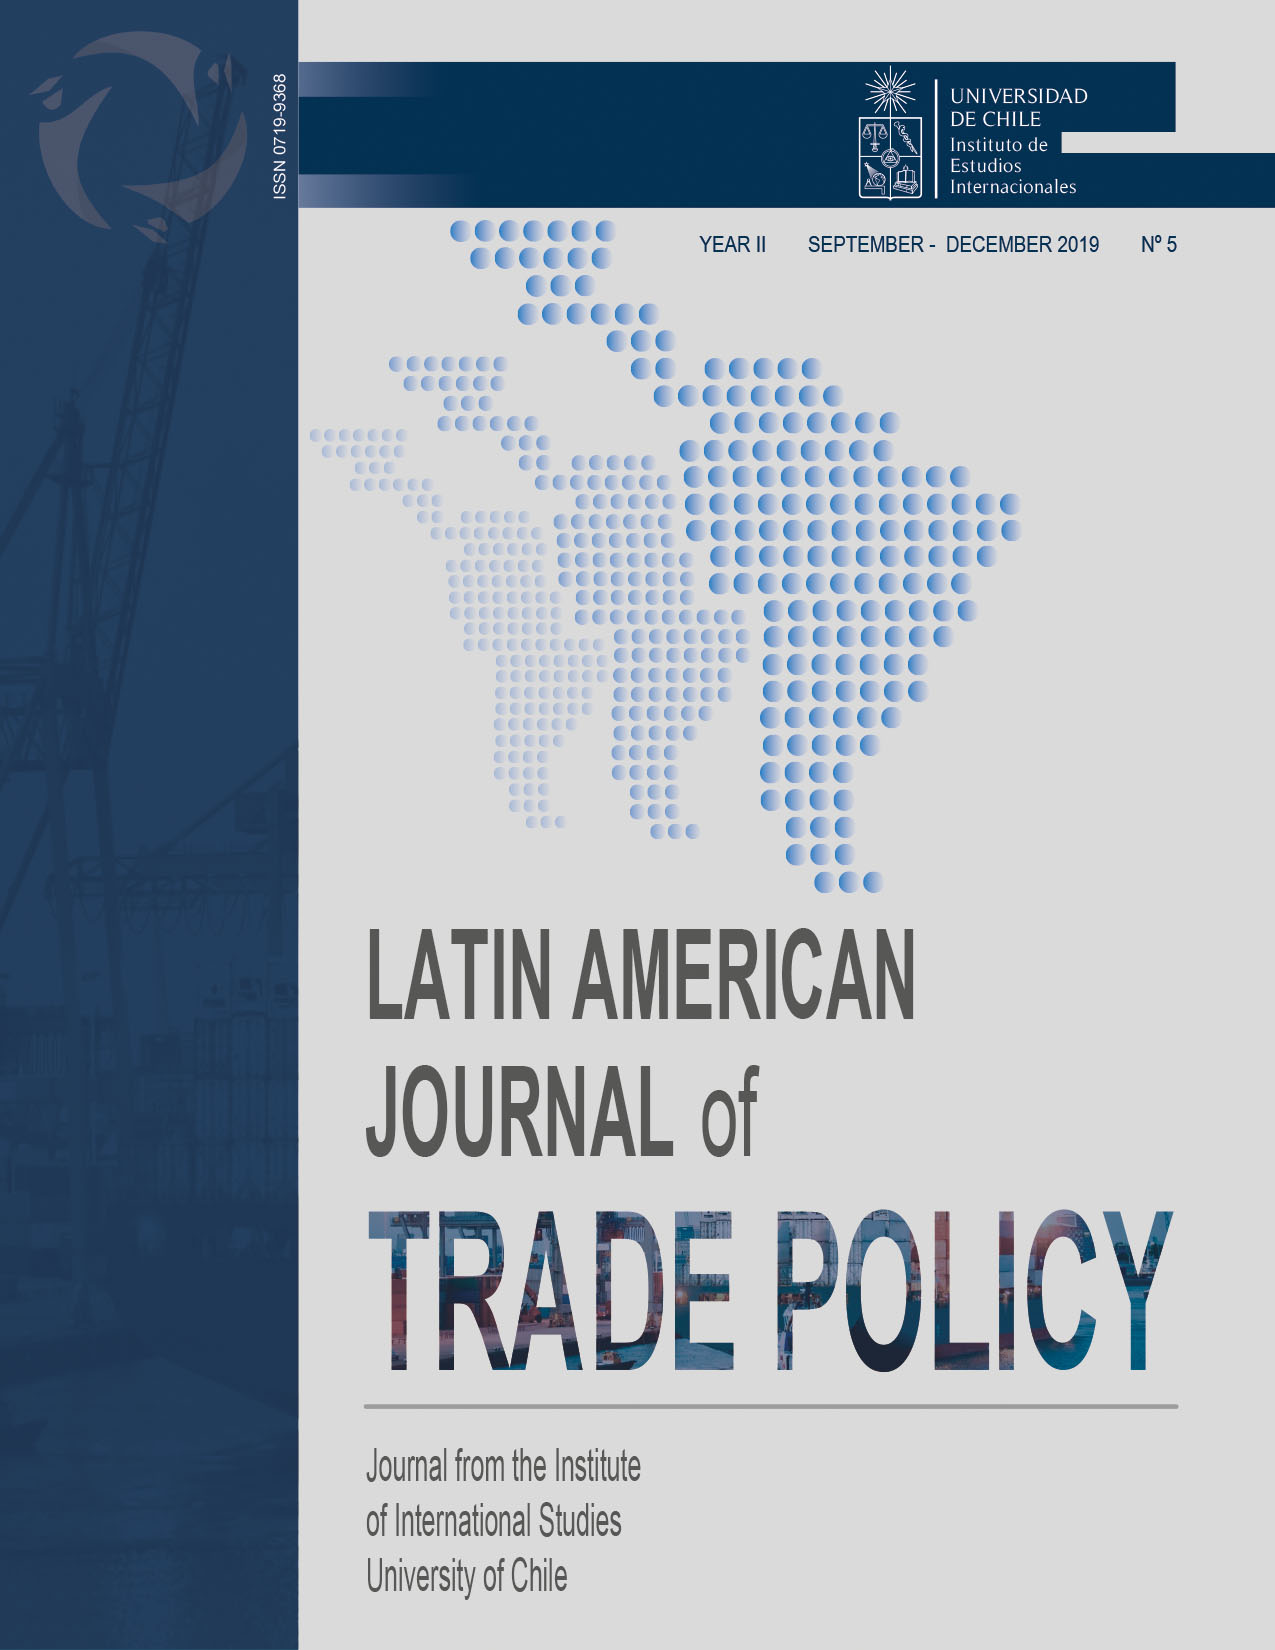 											View Vol. 2 No. 5 (2019): Latin American Journal of Trade Policy
										